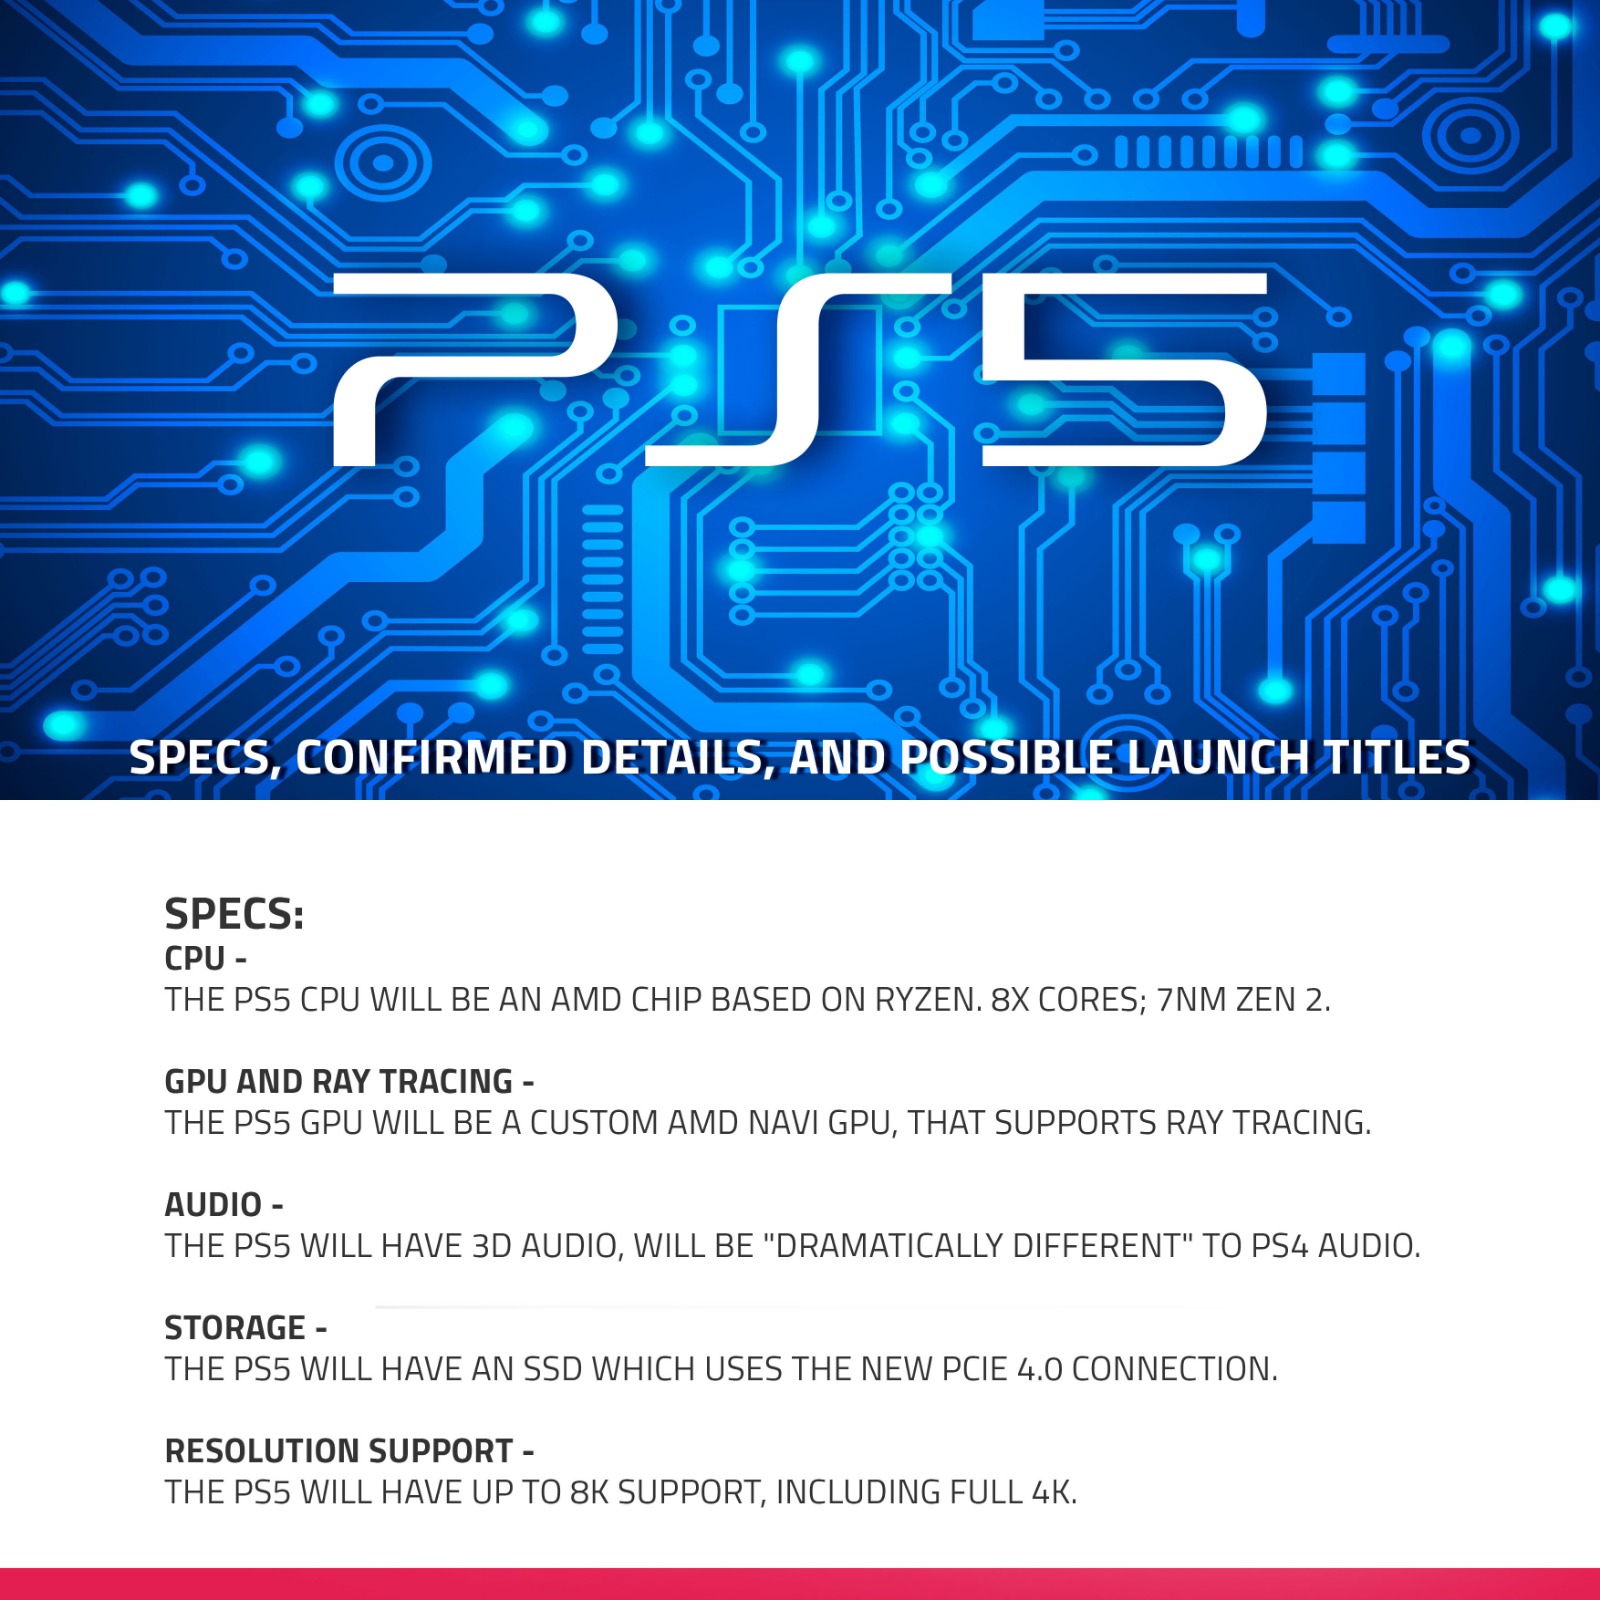 PS5 coming soon!